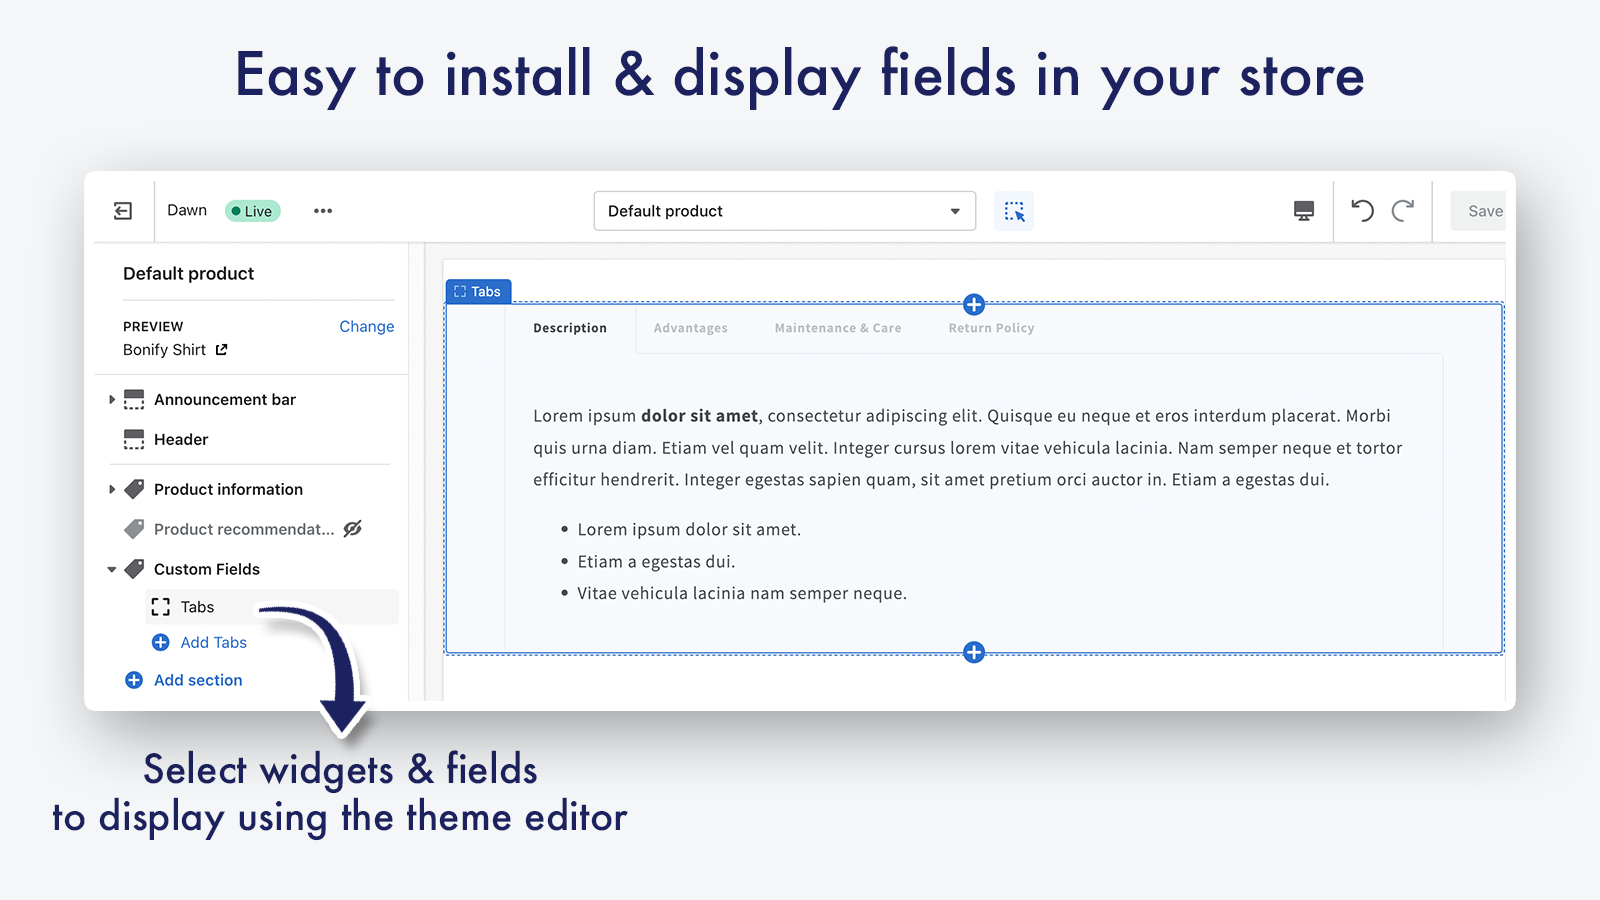 Easy install & display fields in your store